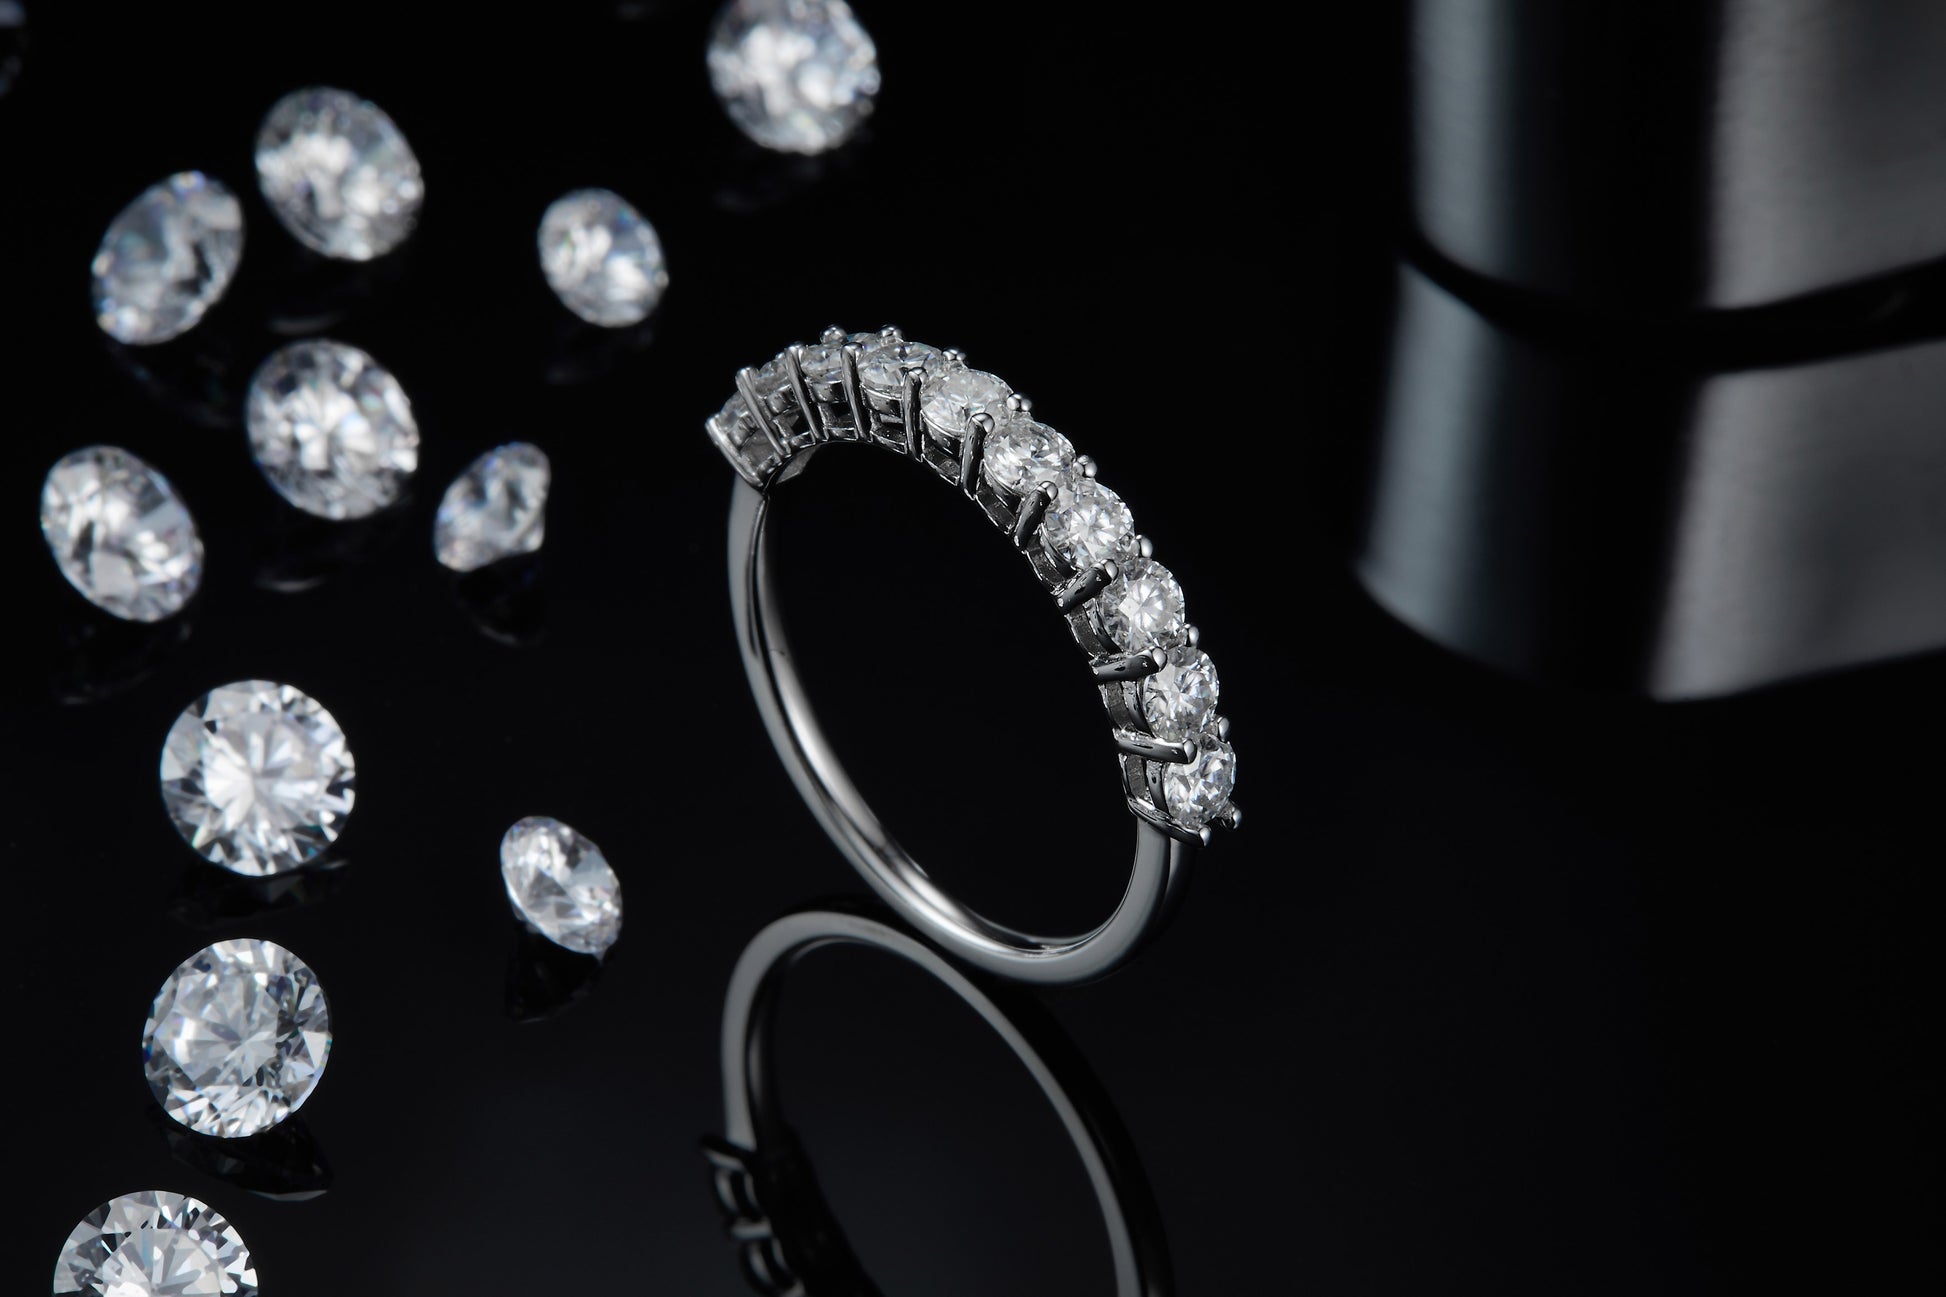 A round cut wedding ring with several small round gems.